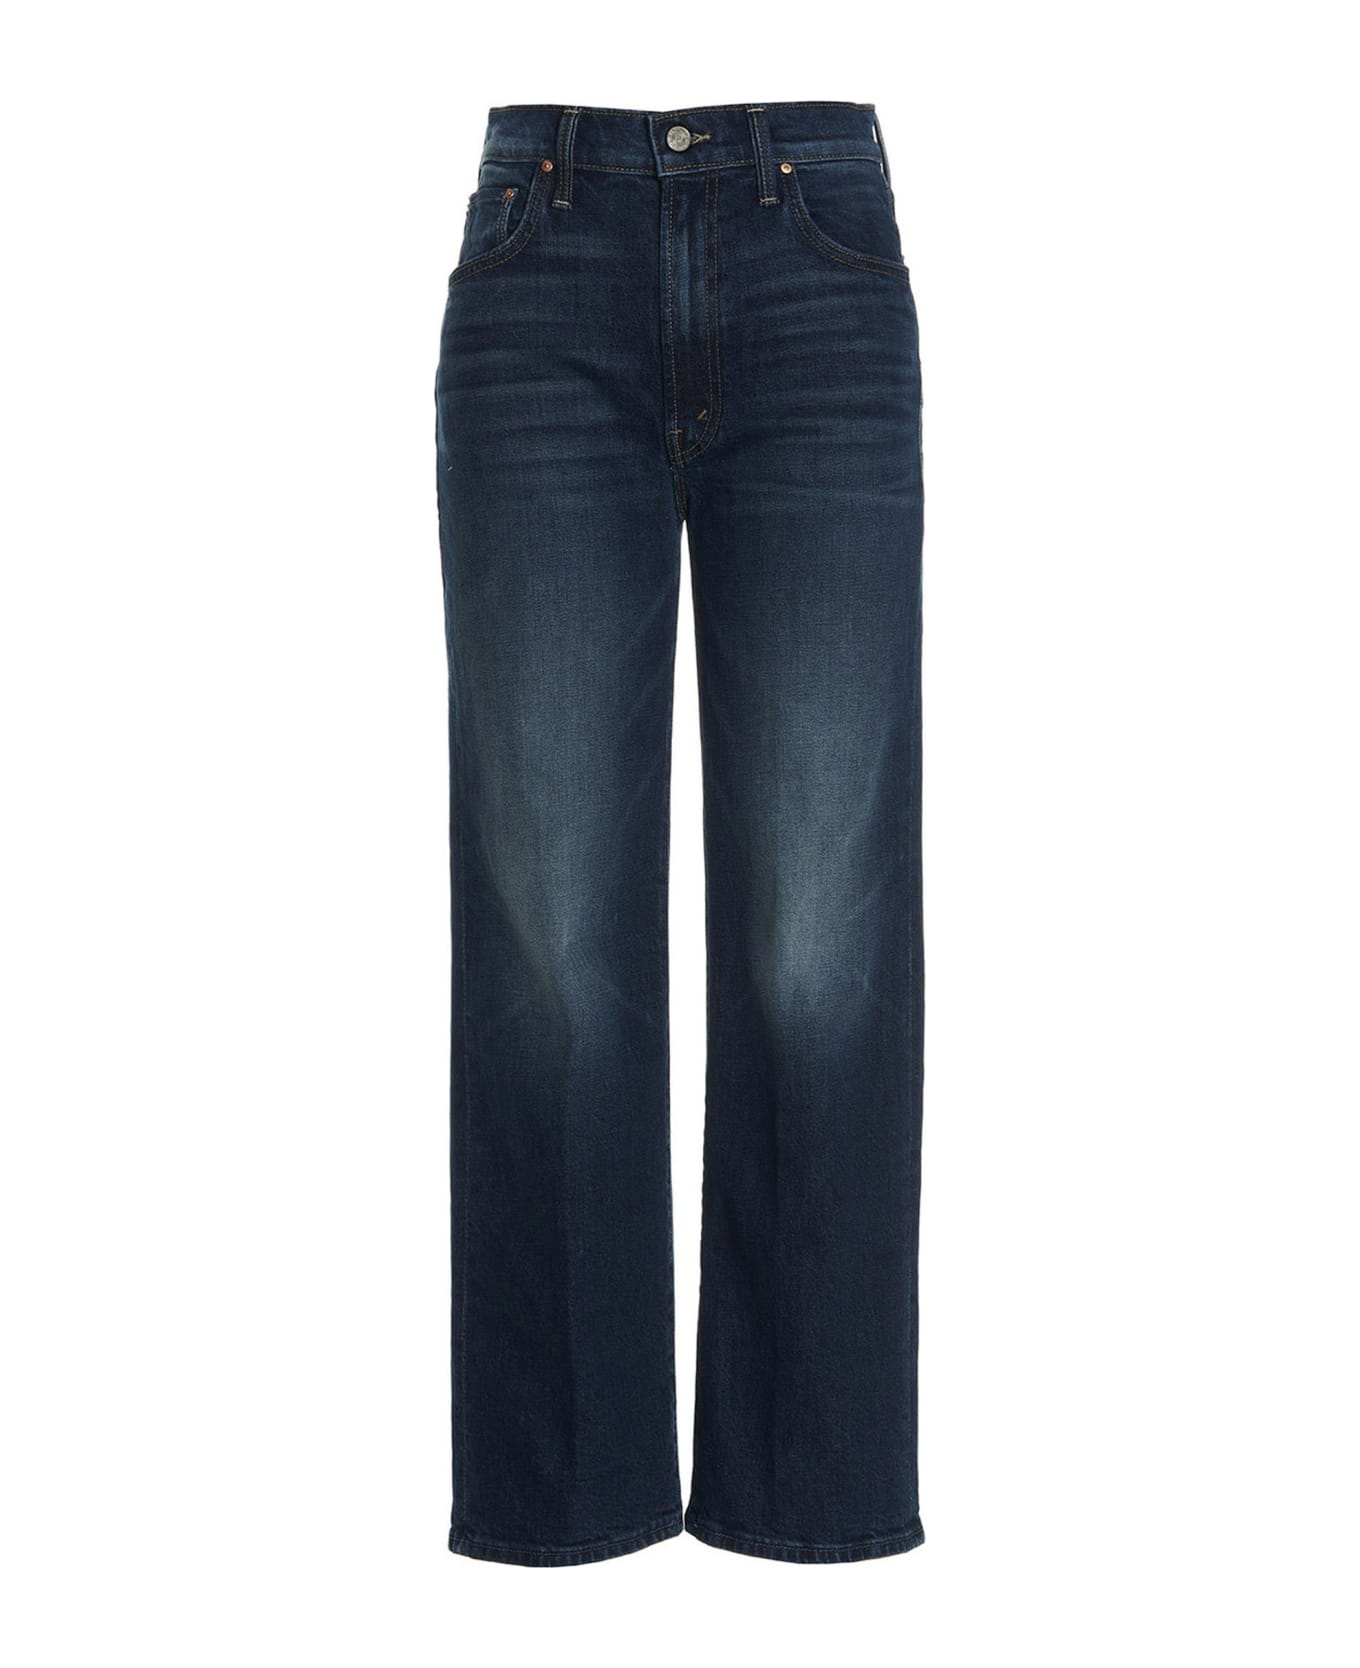 Mother Jeans 'the Rambler Zip Ankle' - Wai Blue